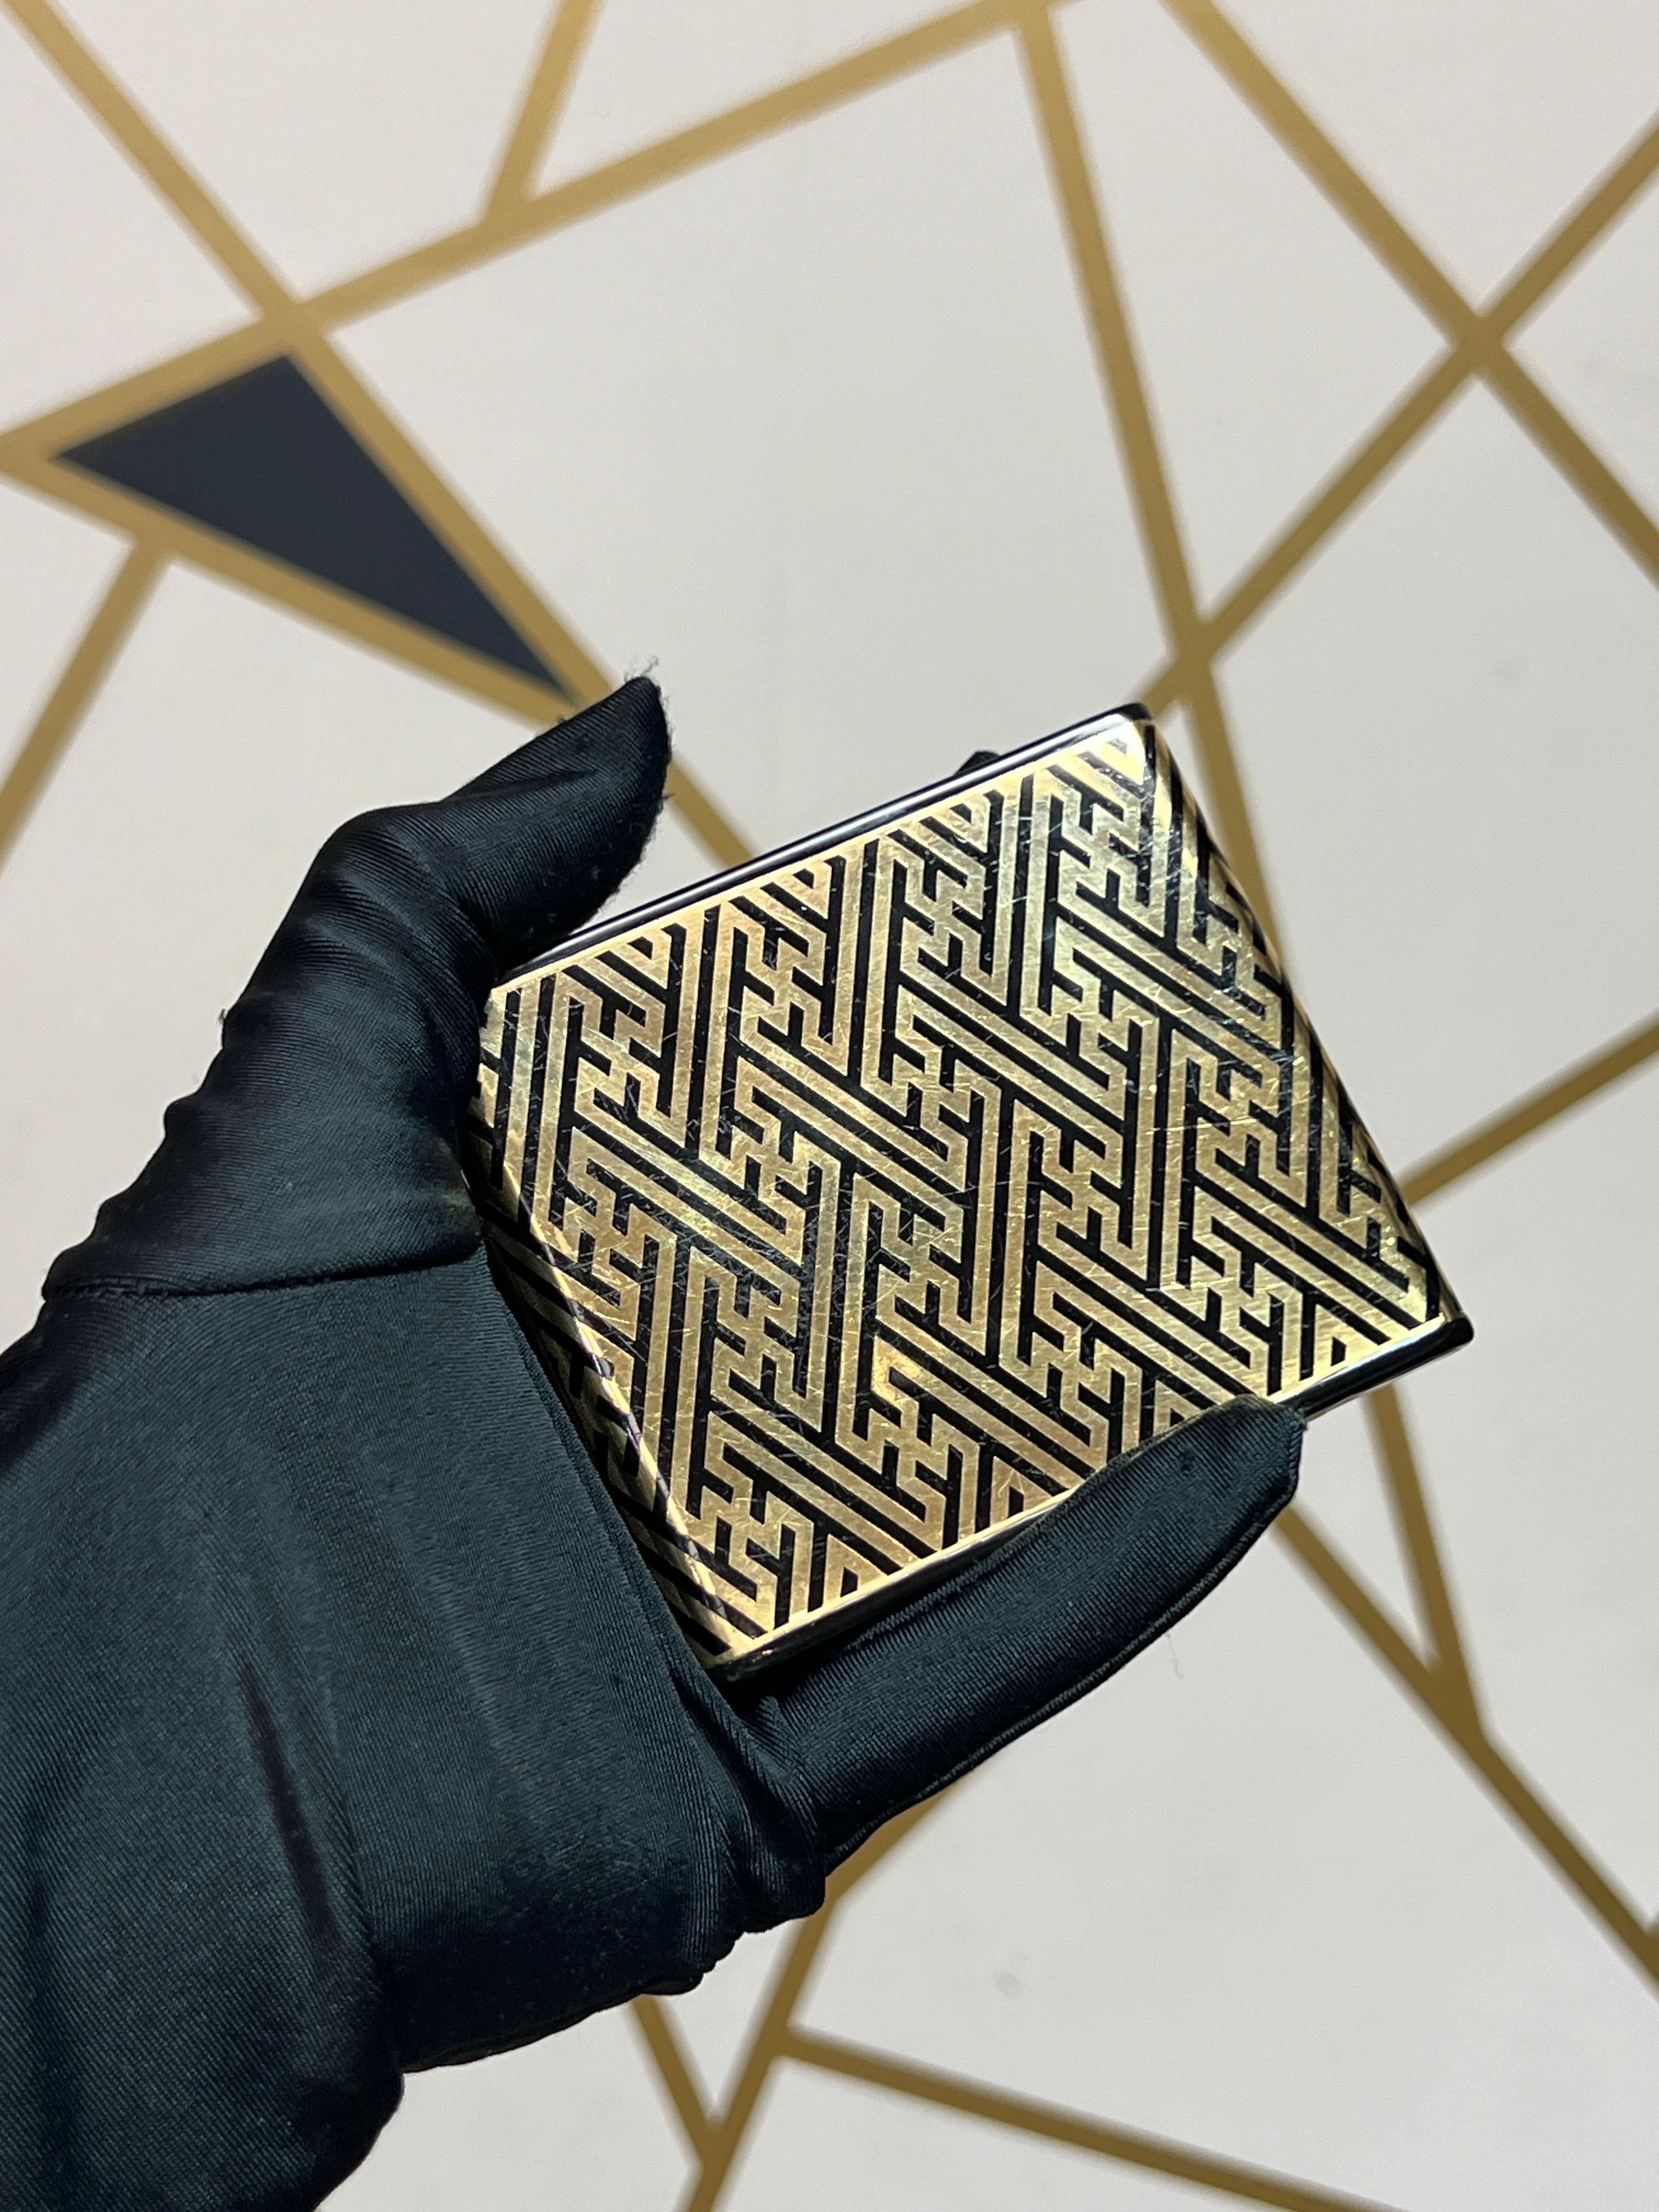 Lacloche Freres Gold and Enamel Cigarette Case

A gold cigarette case adorned with a black enamel geometric design.

Signed Lacloche Frères Paris and numbered
Stamped with French assay, workshop marks, and British import marks

Approximate